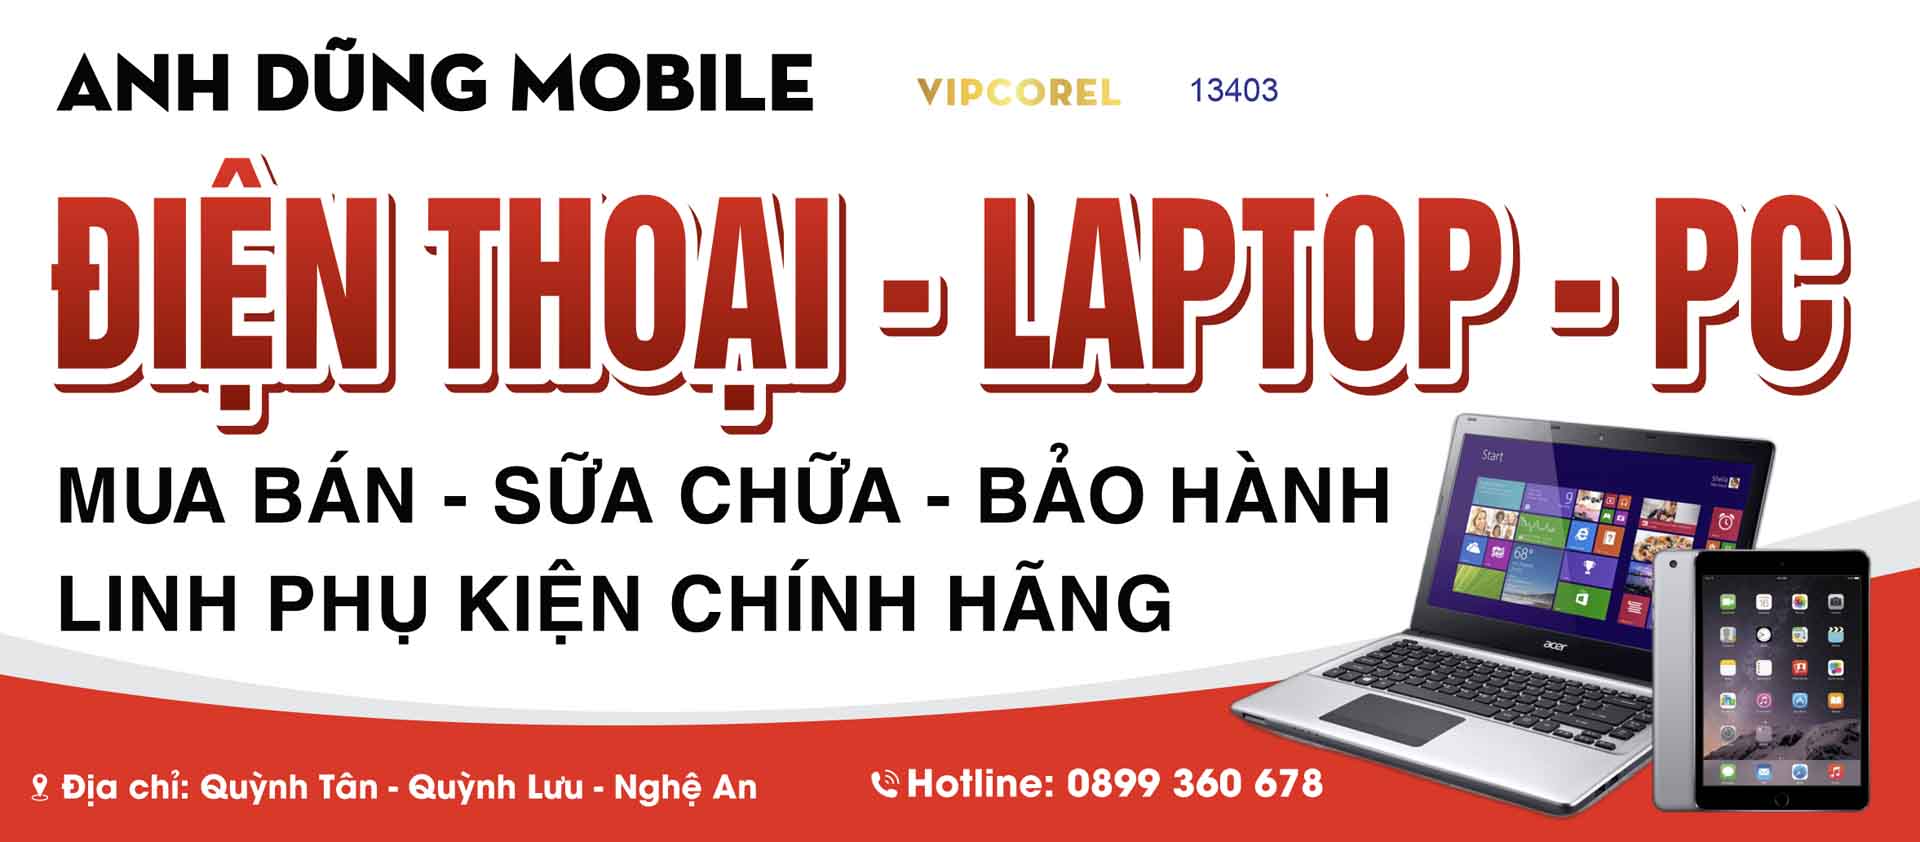 anh dung mobile - dien t hoai - laptop - pc.jpg